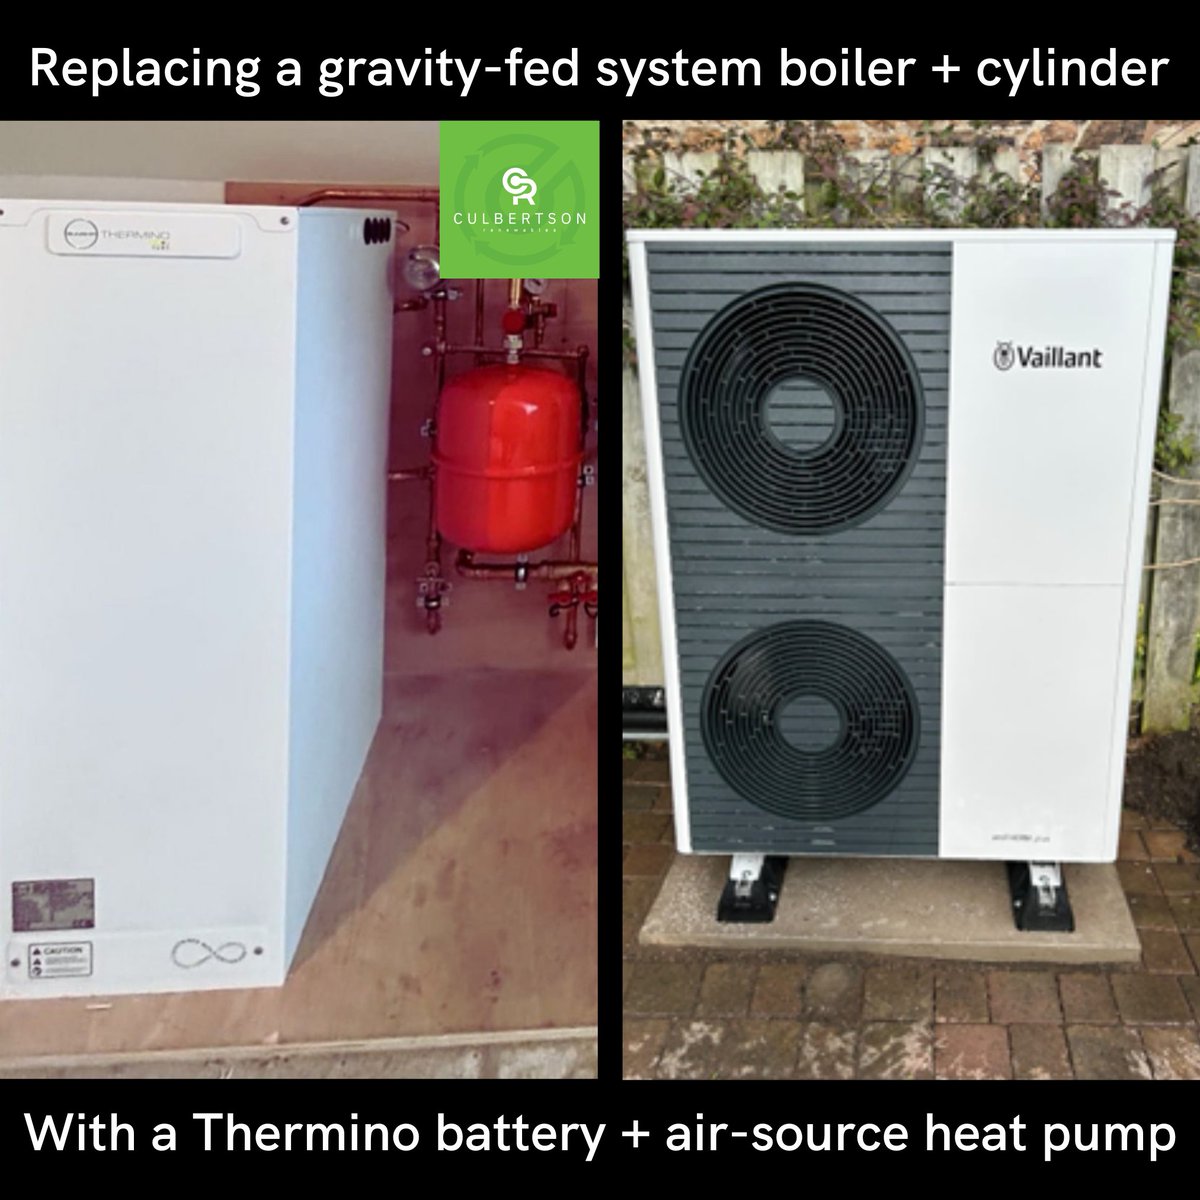 How to bring space and #energyefficiency into your project in a single swap? @Culbertsonrenewables replaced a system #boiler and a bulky #cylinder with a Thermino 300 & @Vaillant’s air-source heat pump, unlocking valuable space & energy savings for their customer.